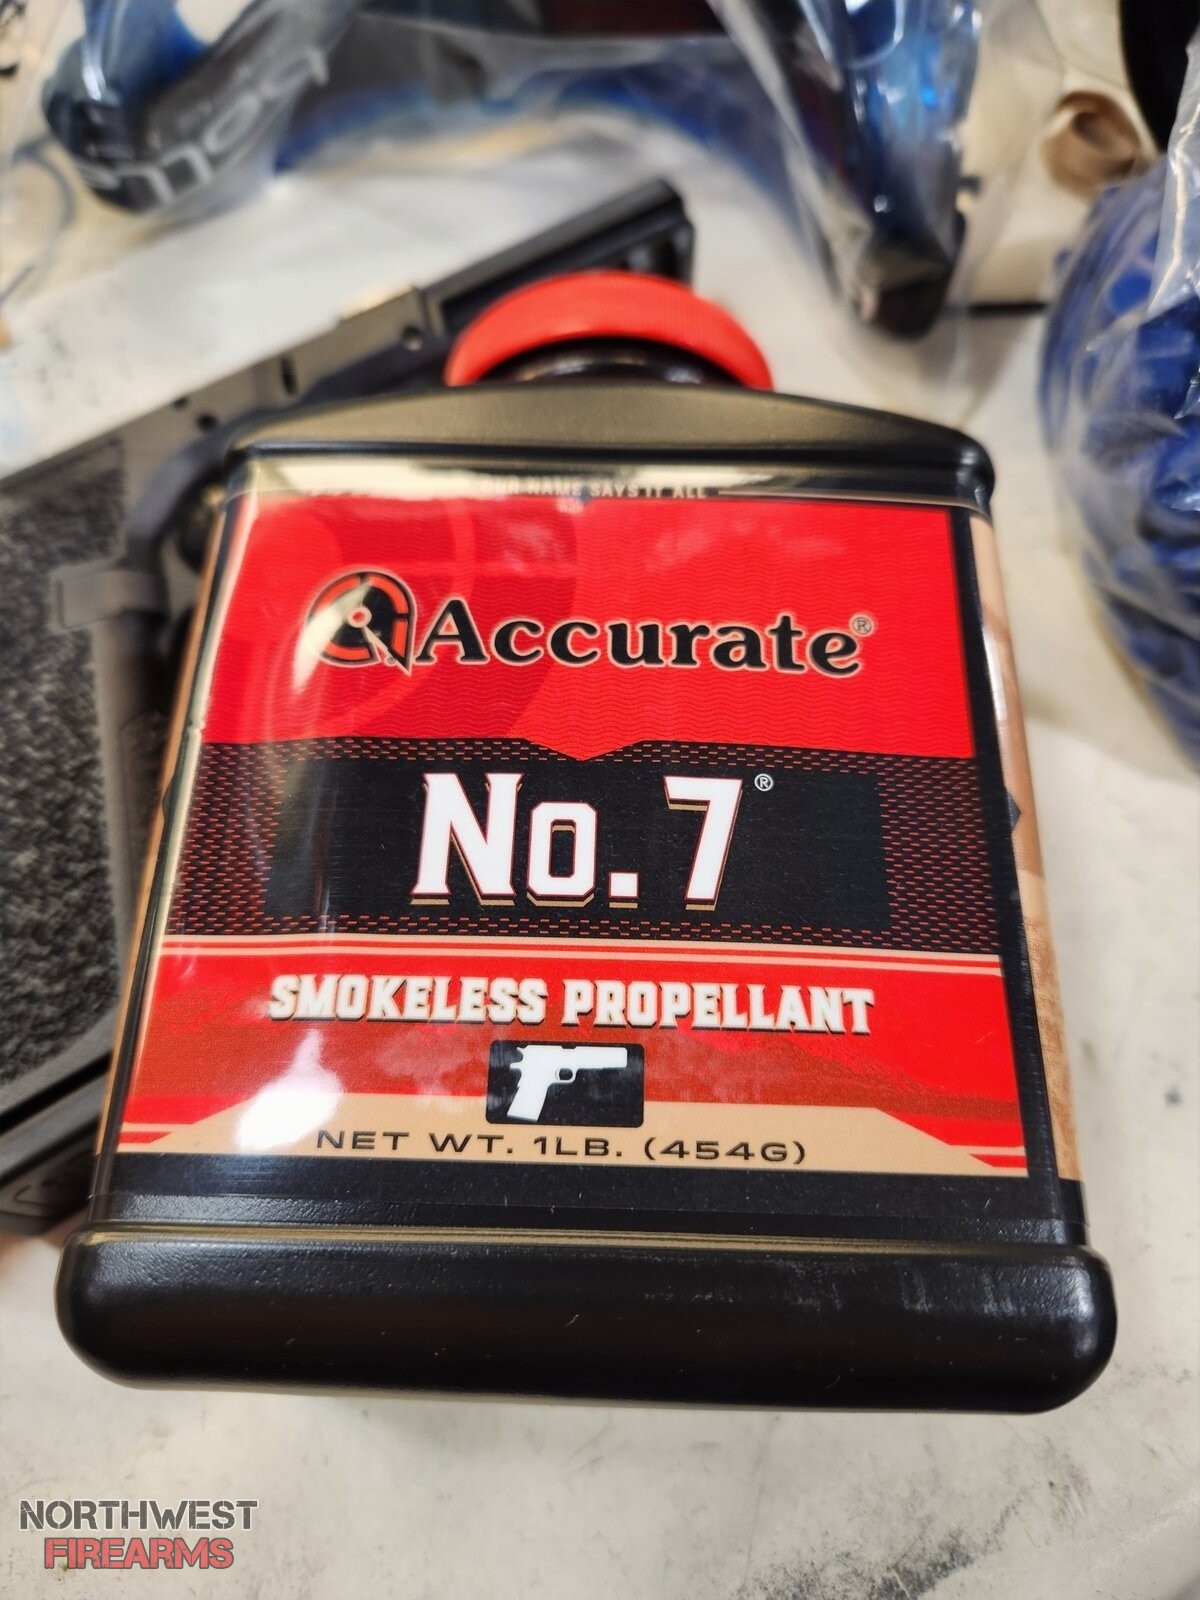 Accurate Arms #7 Smokeless Powder | Northwest Firearms